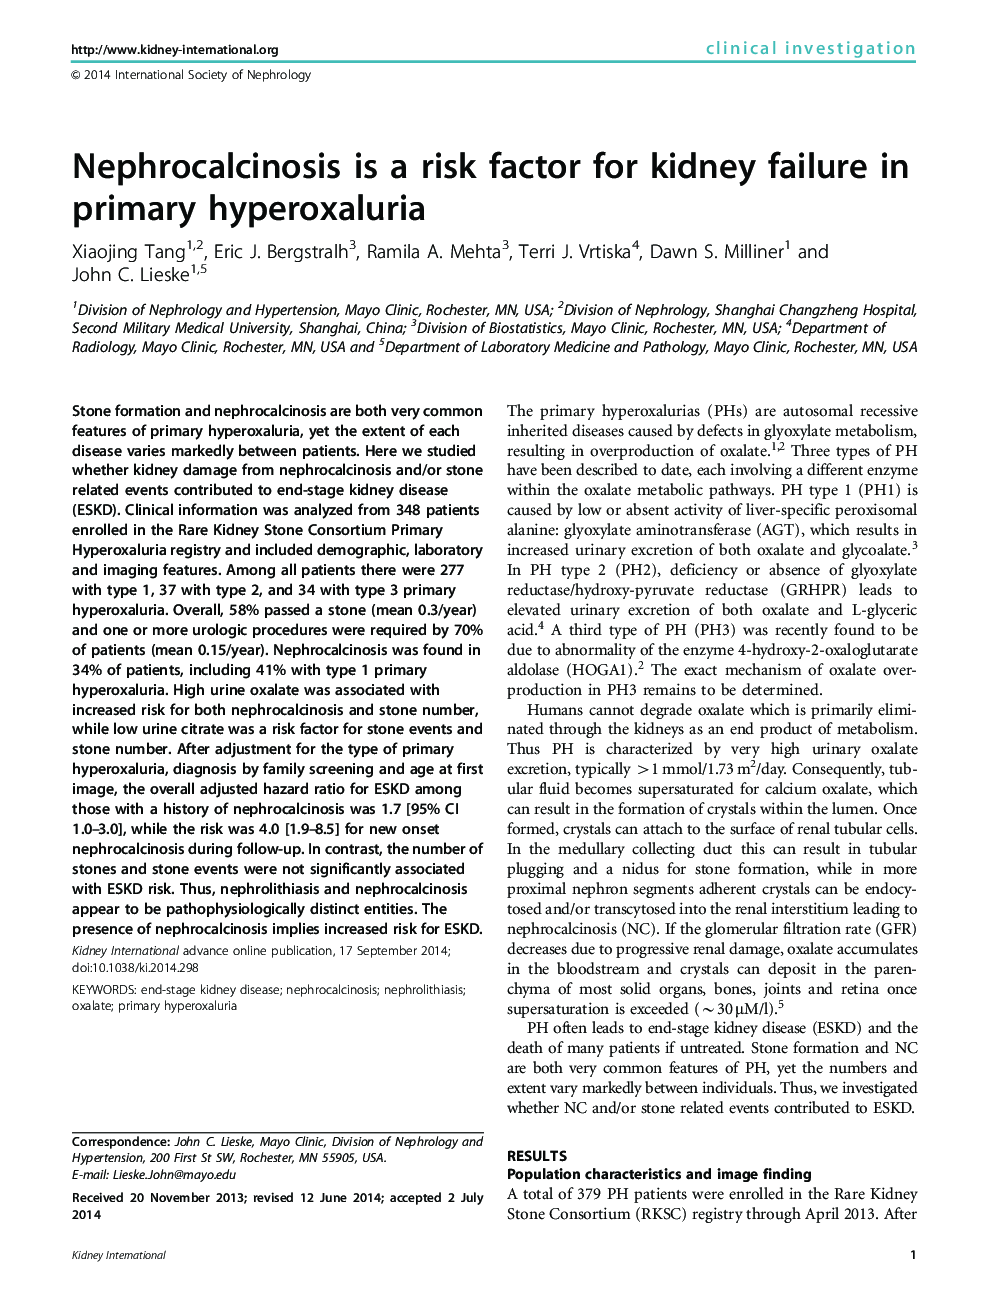 Nephrocalcinosis is a risk factor for kidney failure in primary hyperoxaluria